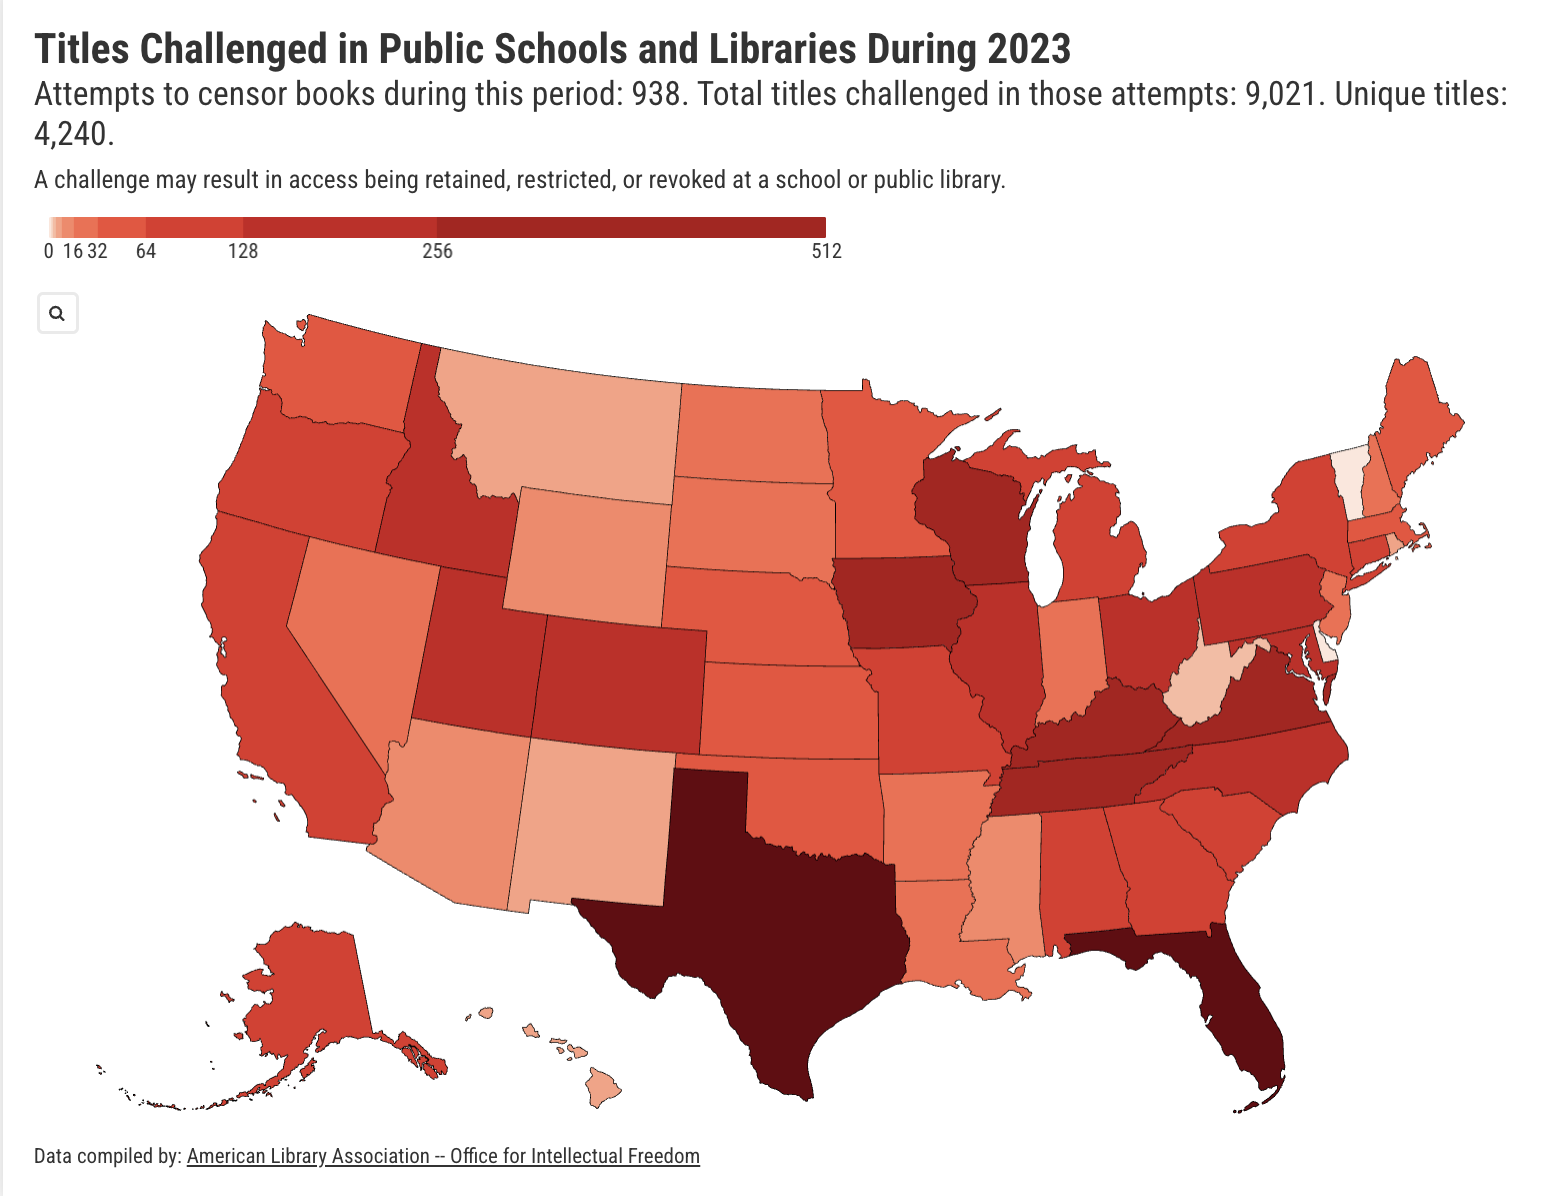 ALA Releases Book Challenge Data for 2023